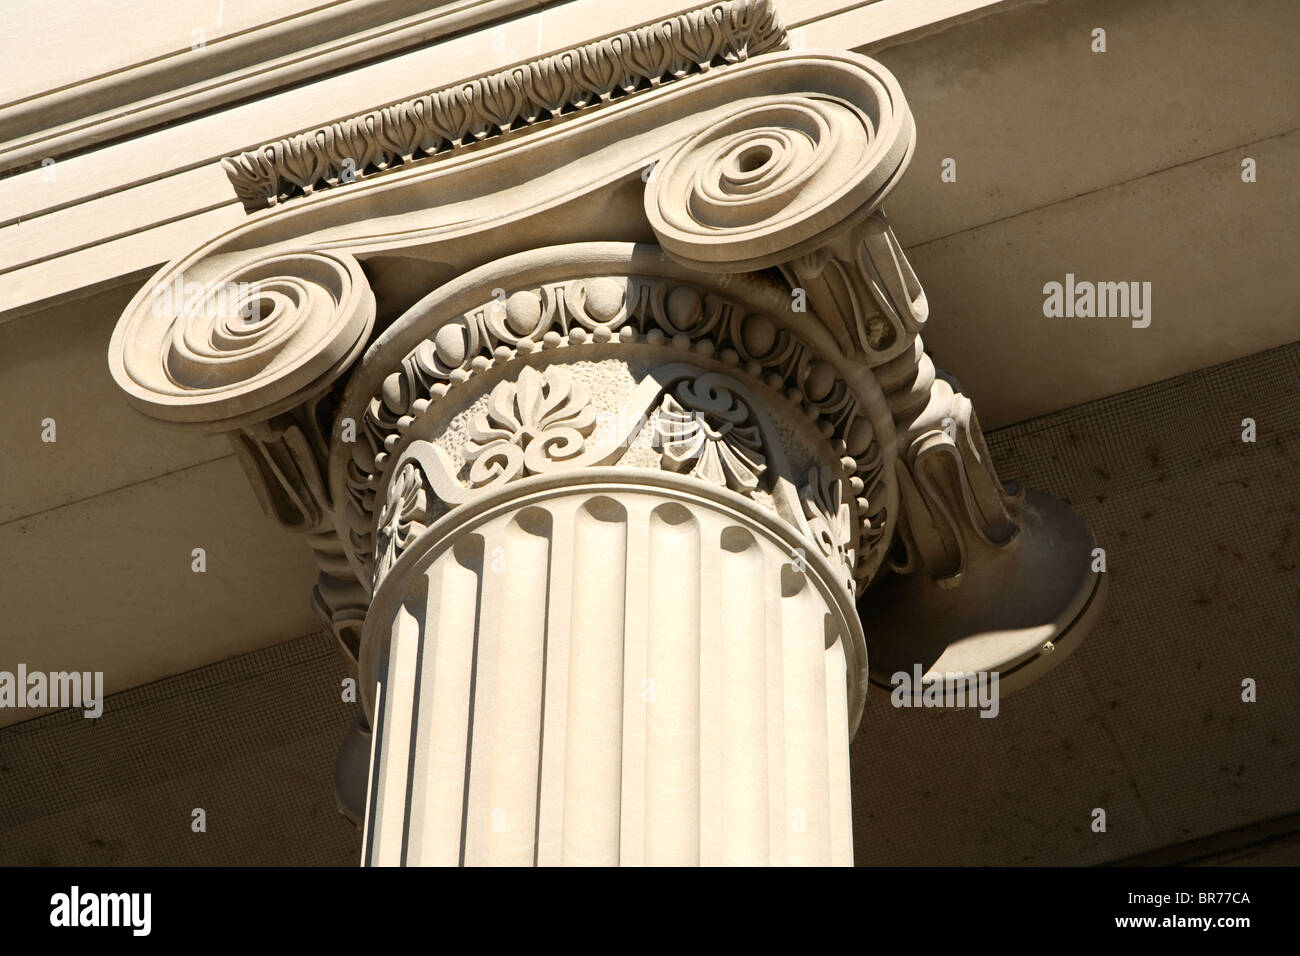 Classical architectural detail of a column on the state capitol building in downtown Nashville TN Stock Photo